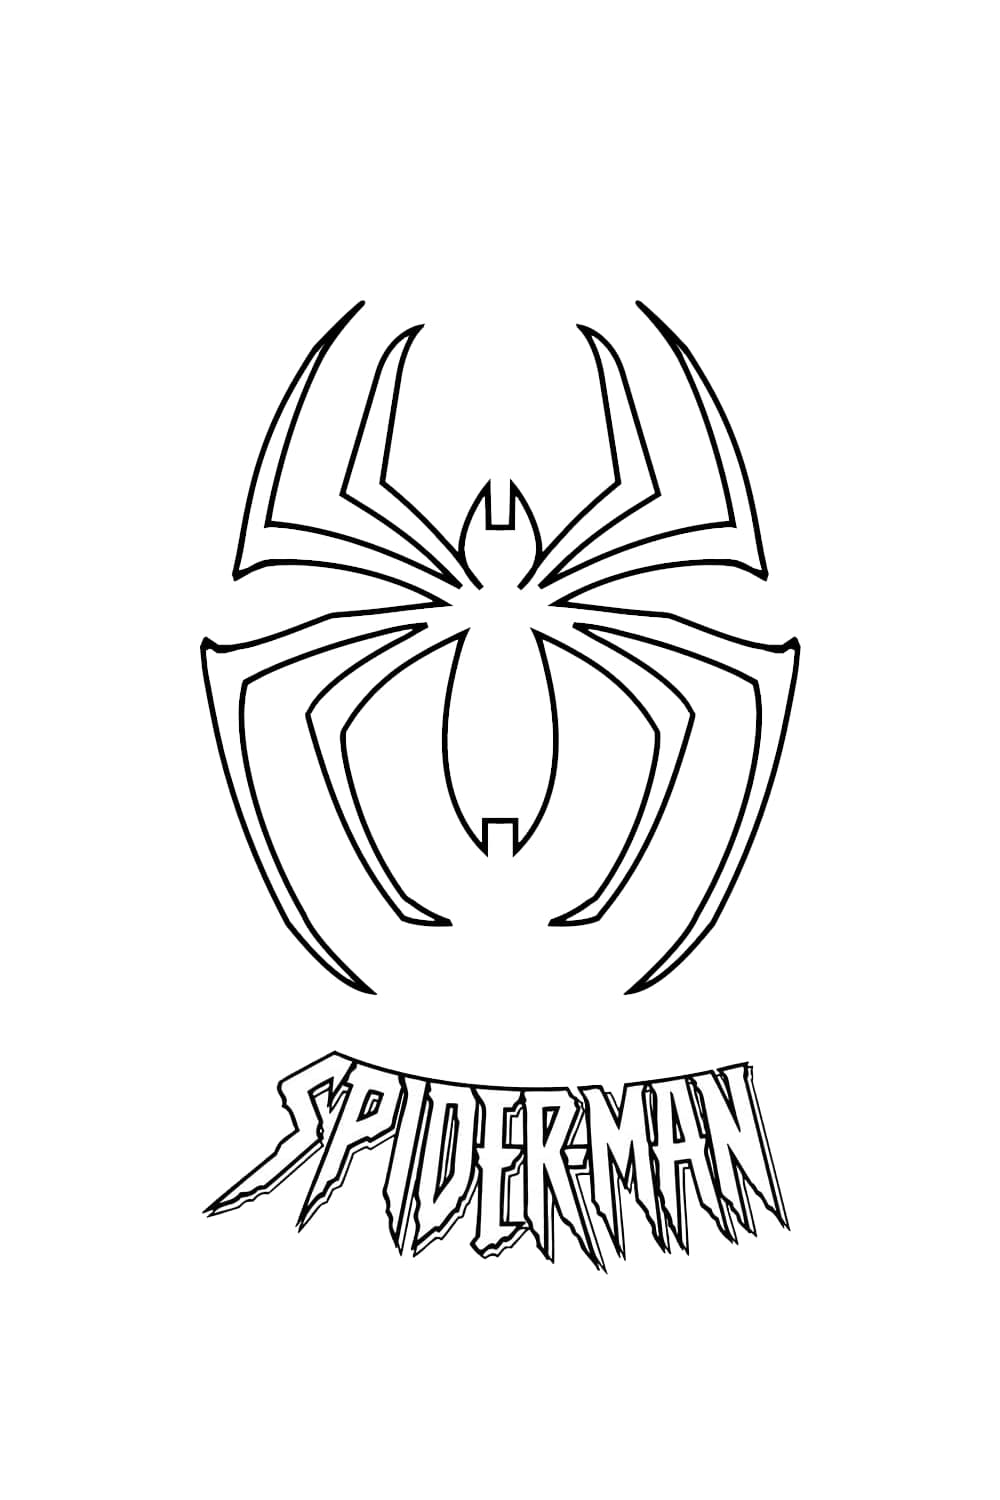 Spiderman logo coloring pages